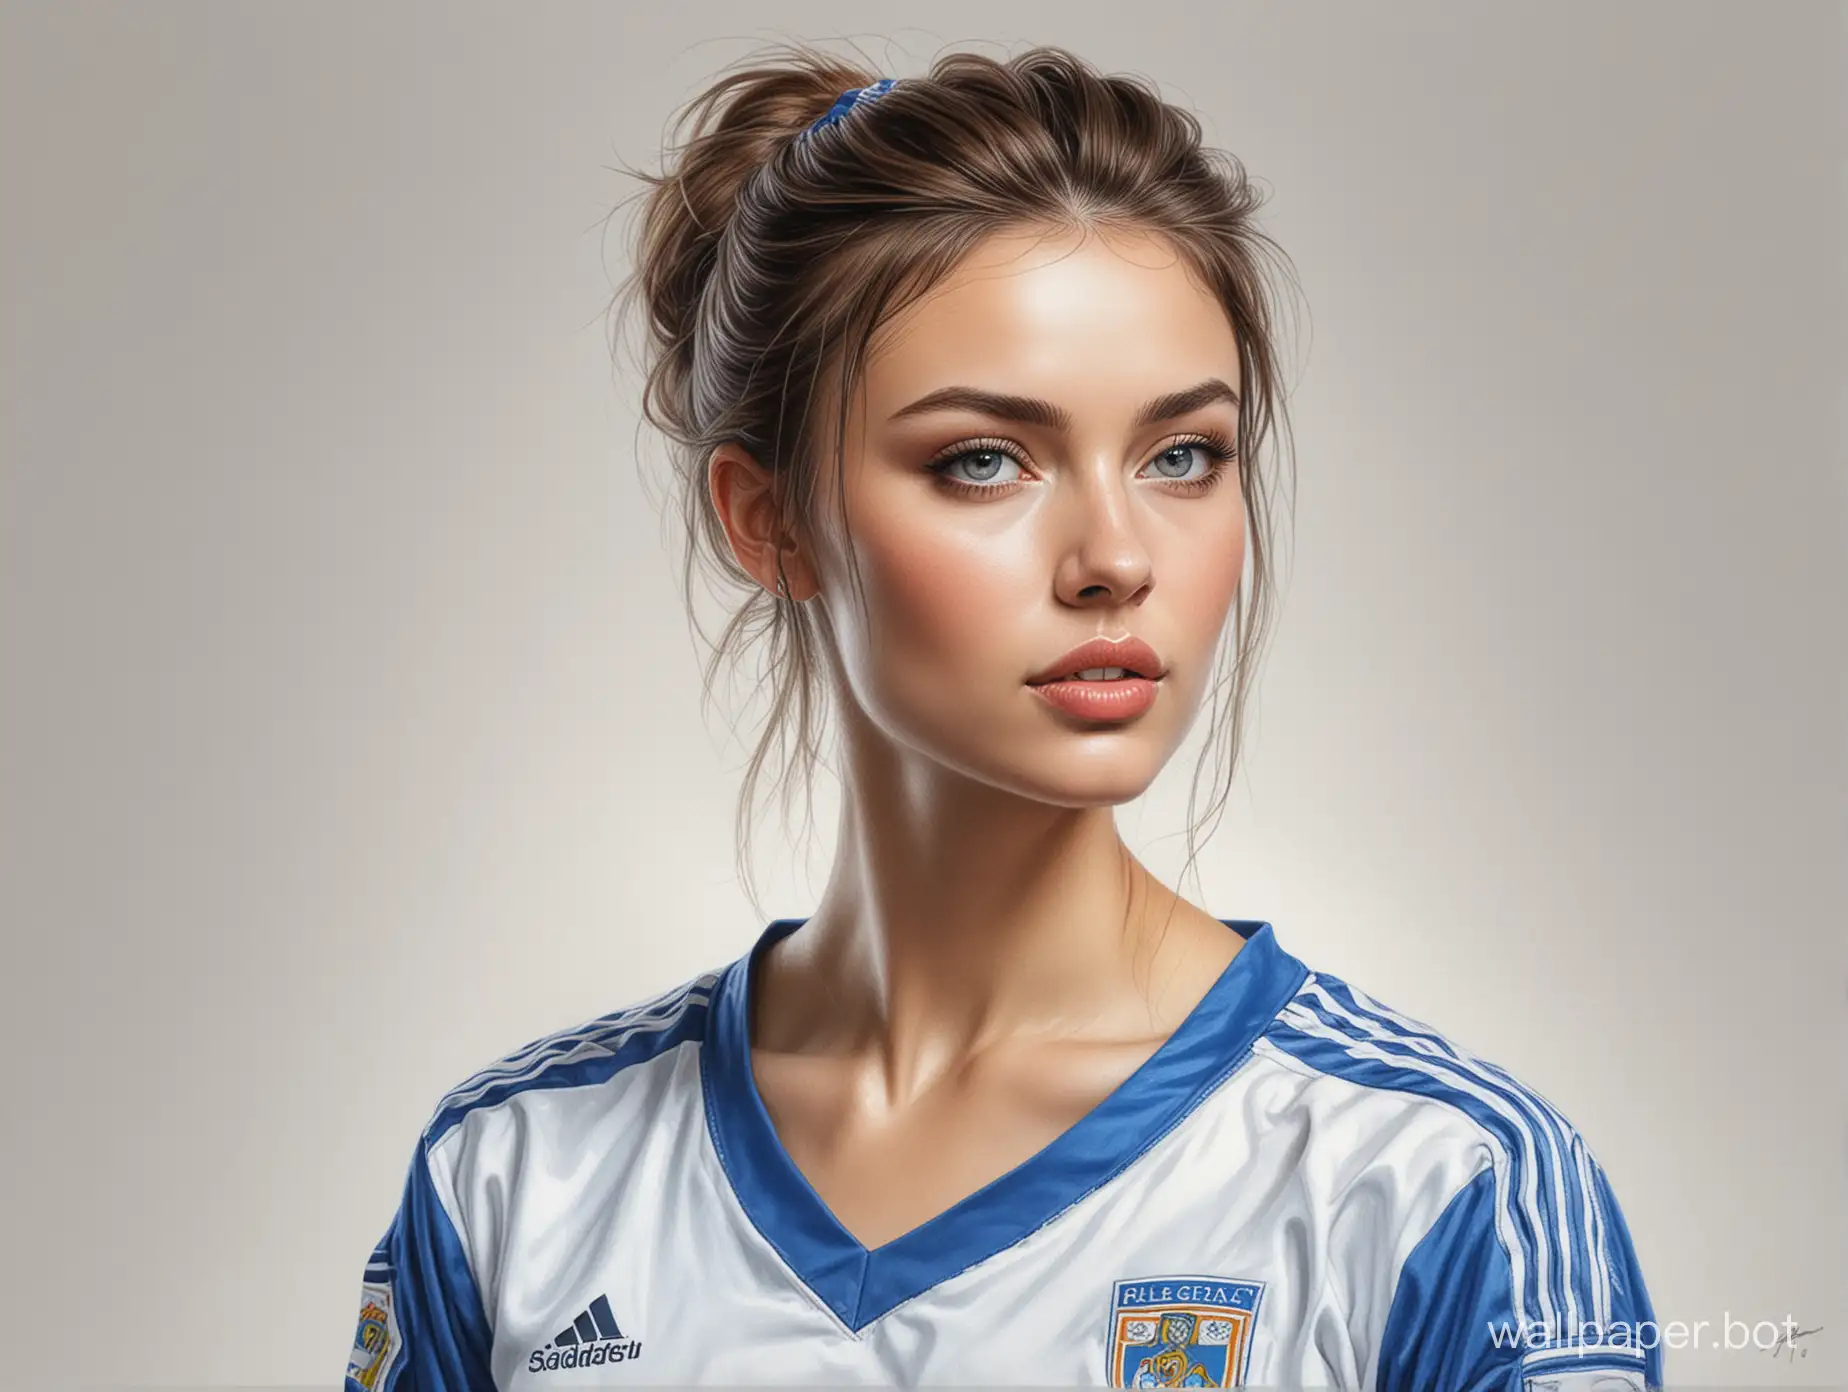 Sketch Irina Chashchina, 25 years old, cup size 4, narrow waist, in bright blue soccer uniform on white background, very realistic drawing in colored pencil by Stmly Luis Royo